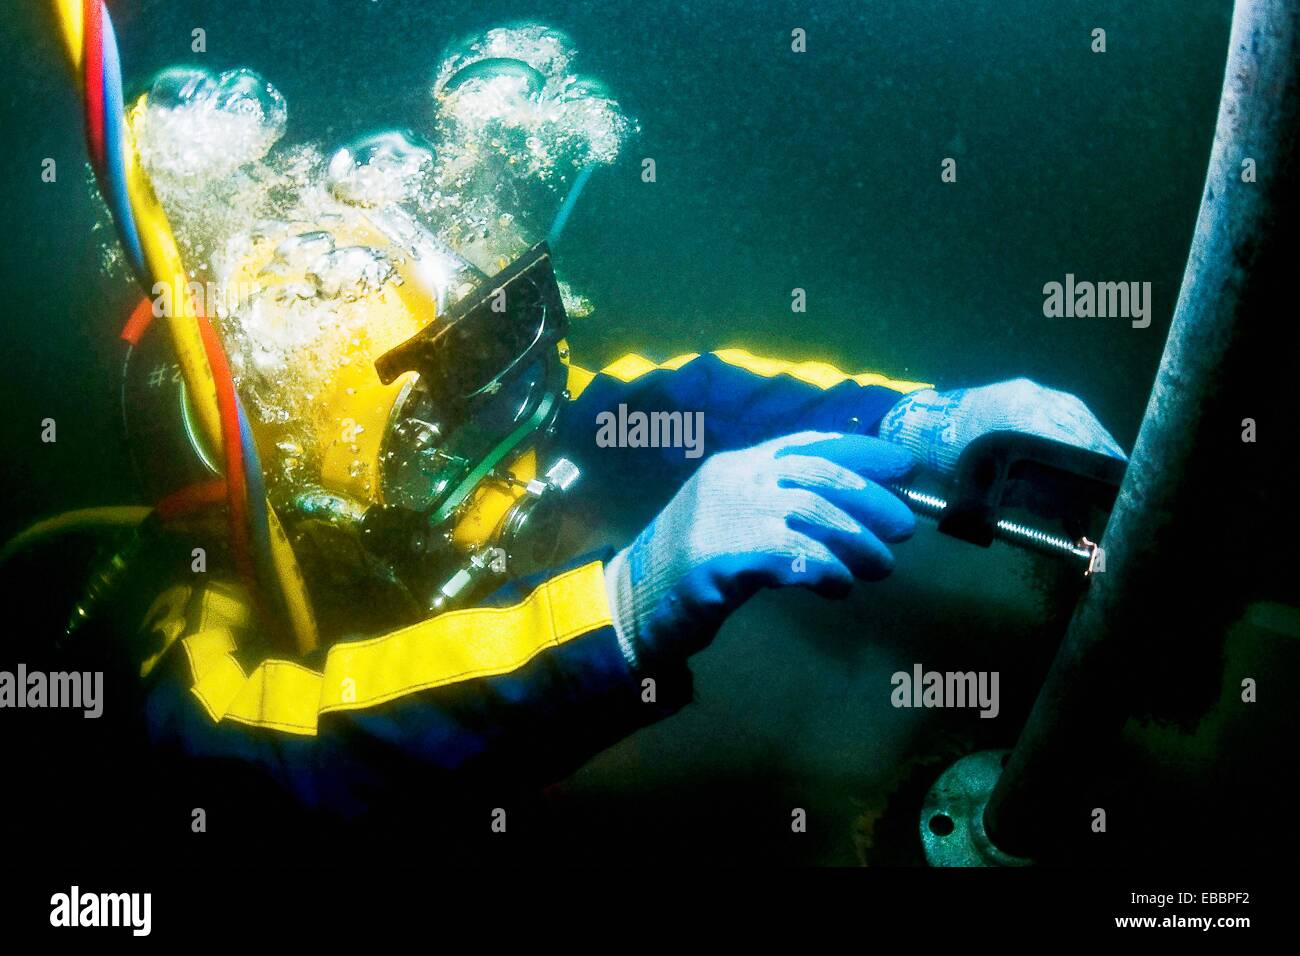 100715-N-1134L-028 VERACRUZ, Mexico July 15, 2010 Navy Diver 2nd Class Jason Hatch, assigned to Company 2-6 of Mobile Diving Stock Photo